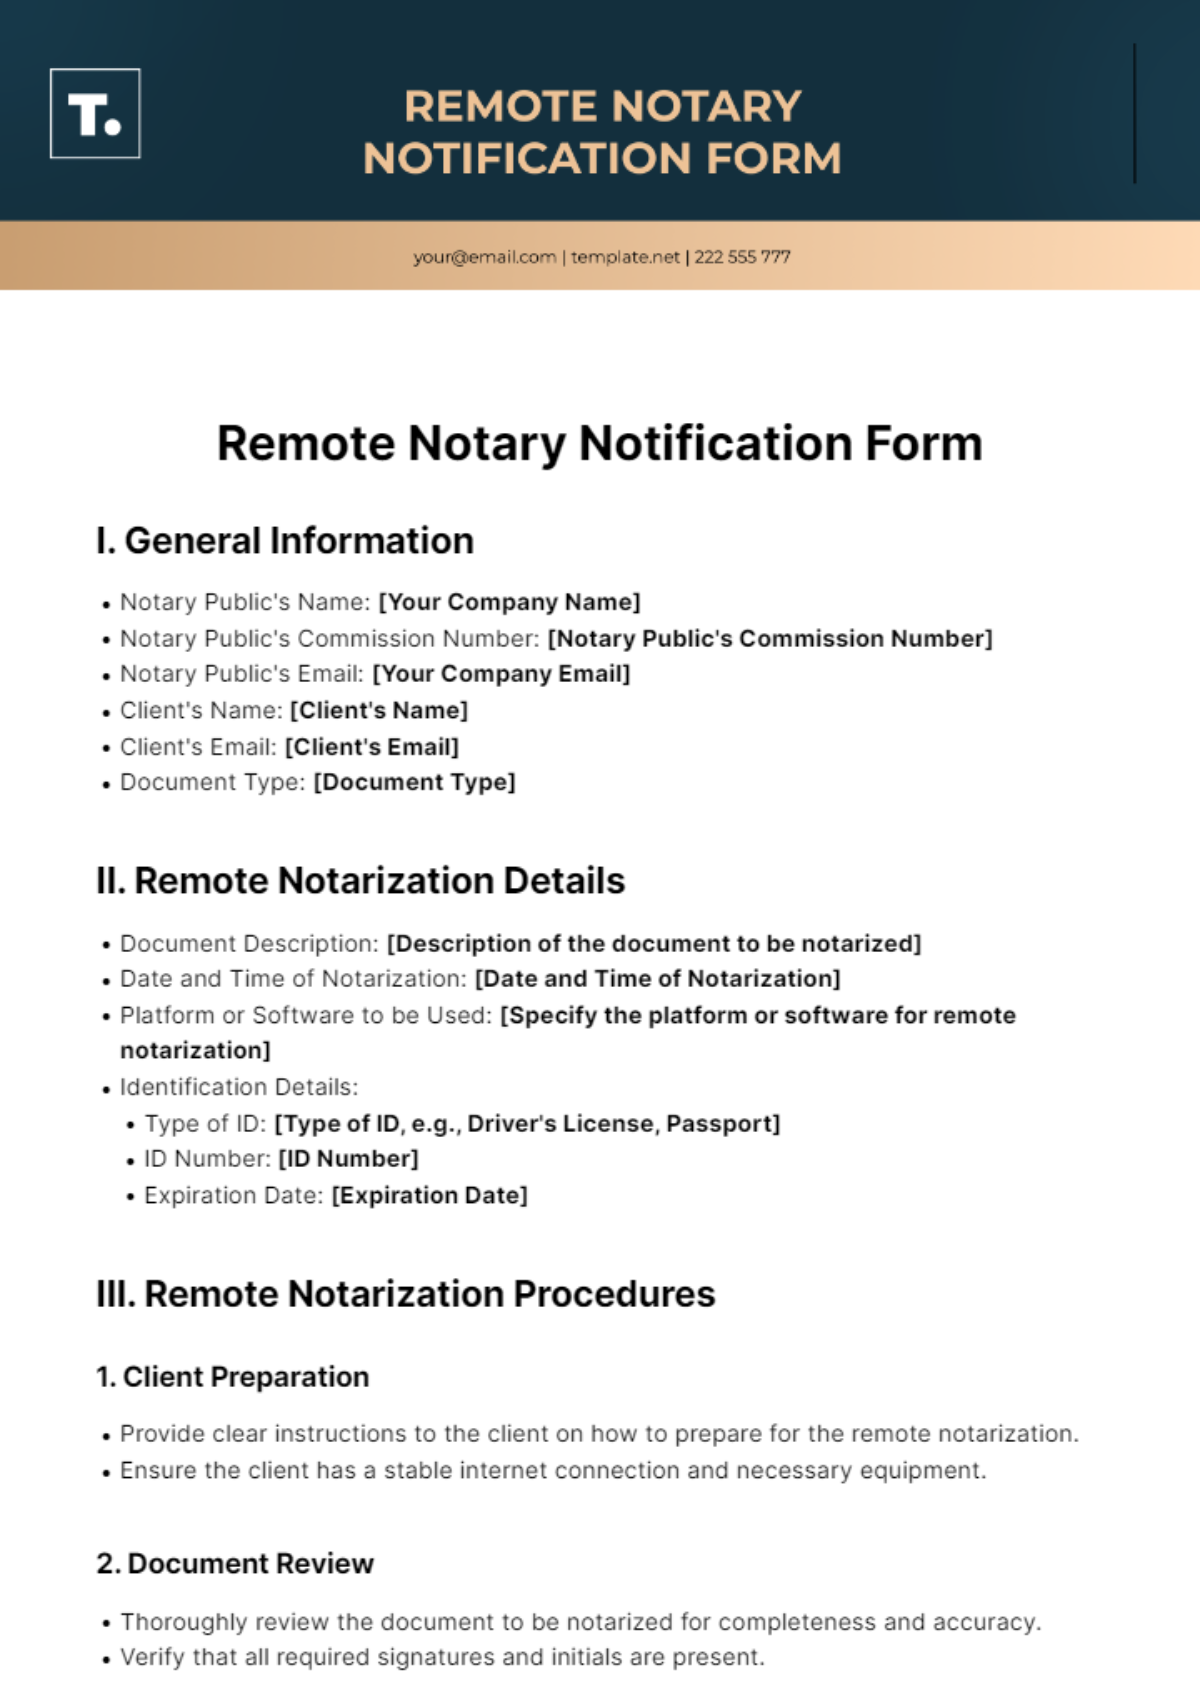 Free Remote Notary Notification Form Template